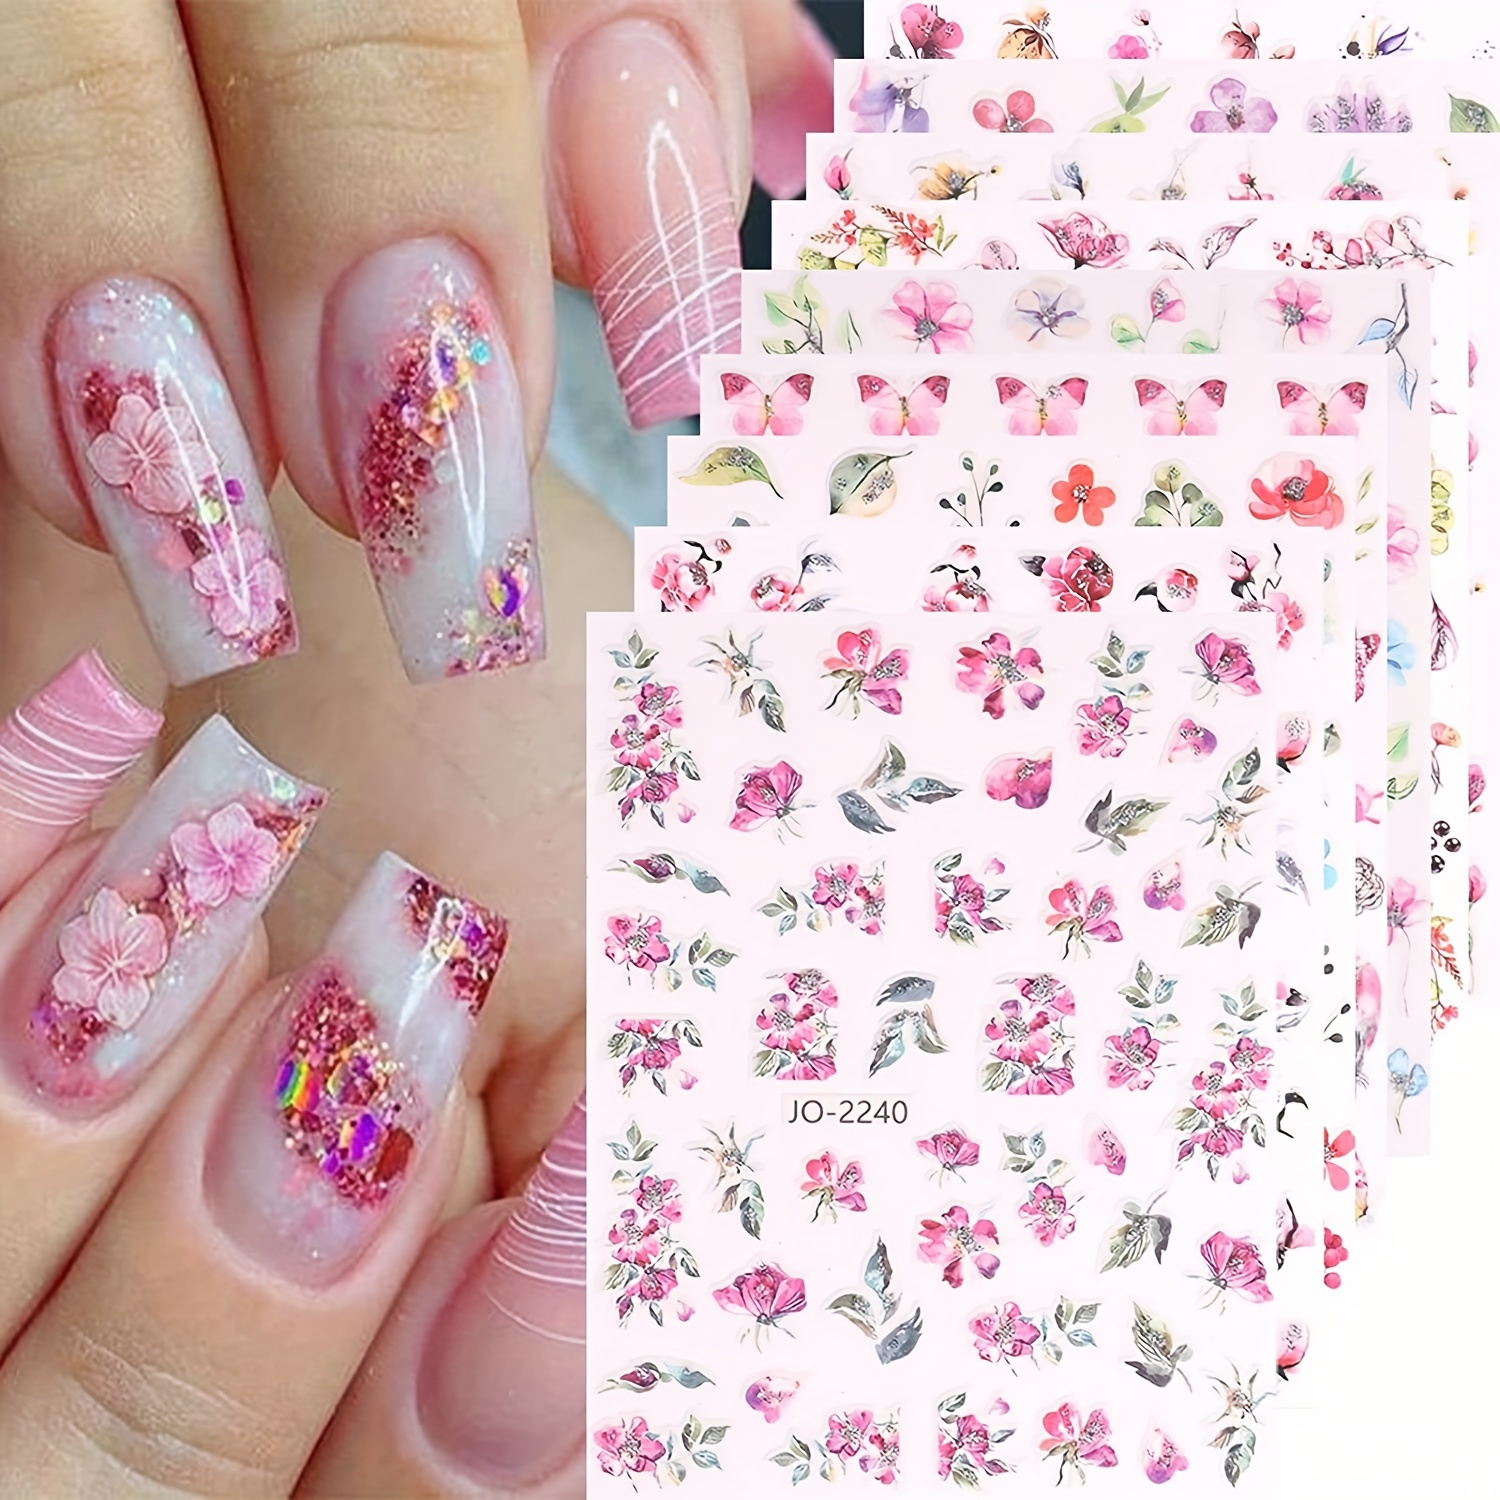 

Colorful 3d Flower Nail Stickers - 9 Sheets Of Self-adhesive Decals For Spring Nail Art - Perfect For French Nail Design And Decoration - Women's Nail Supplies And Accessories